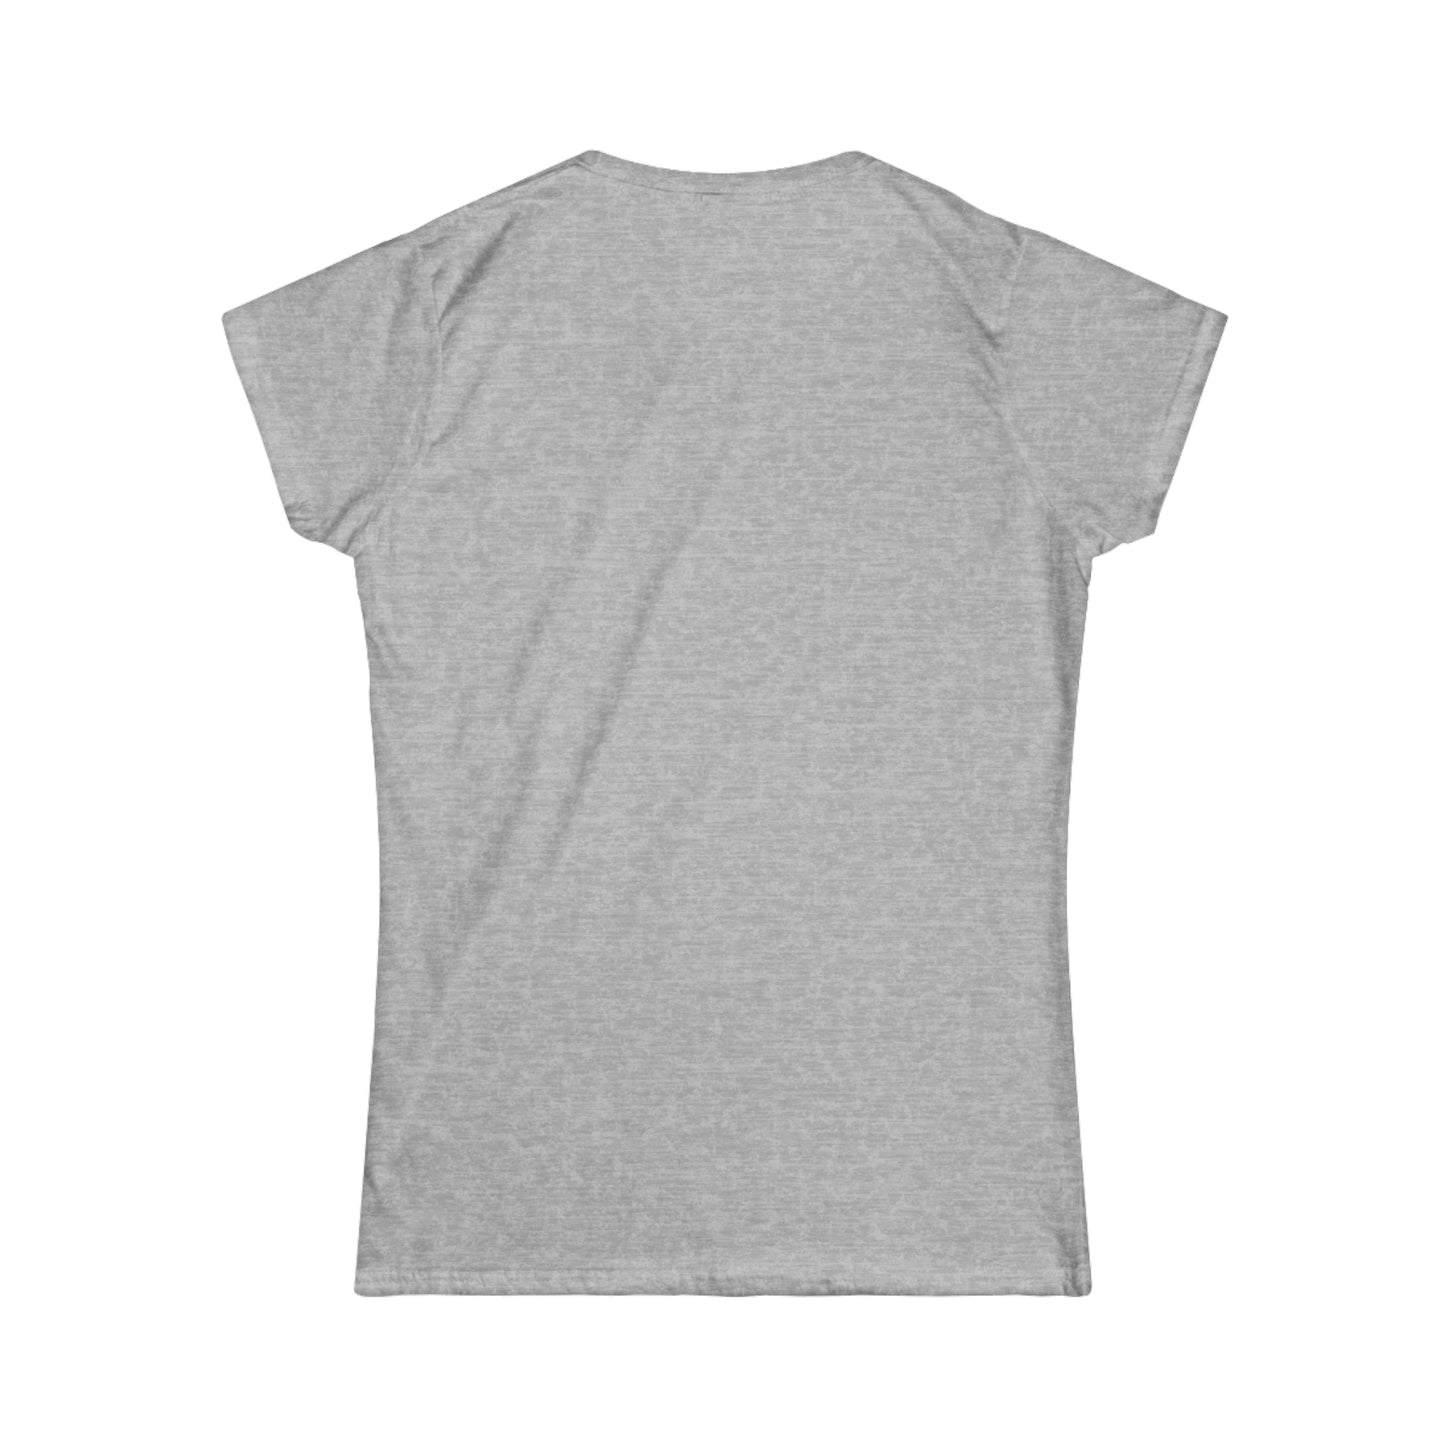 Faith without Proof of Work - Women's Softstyle Tee